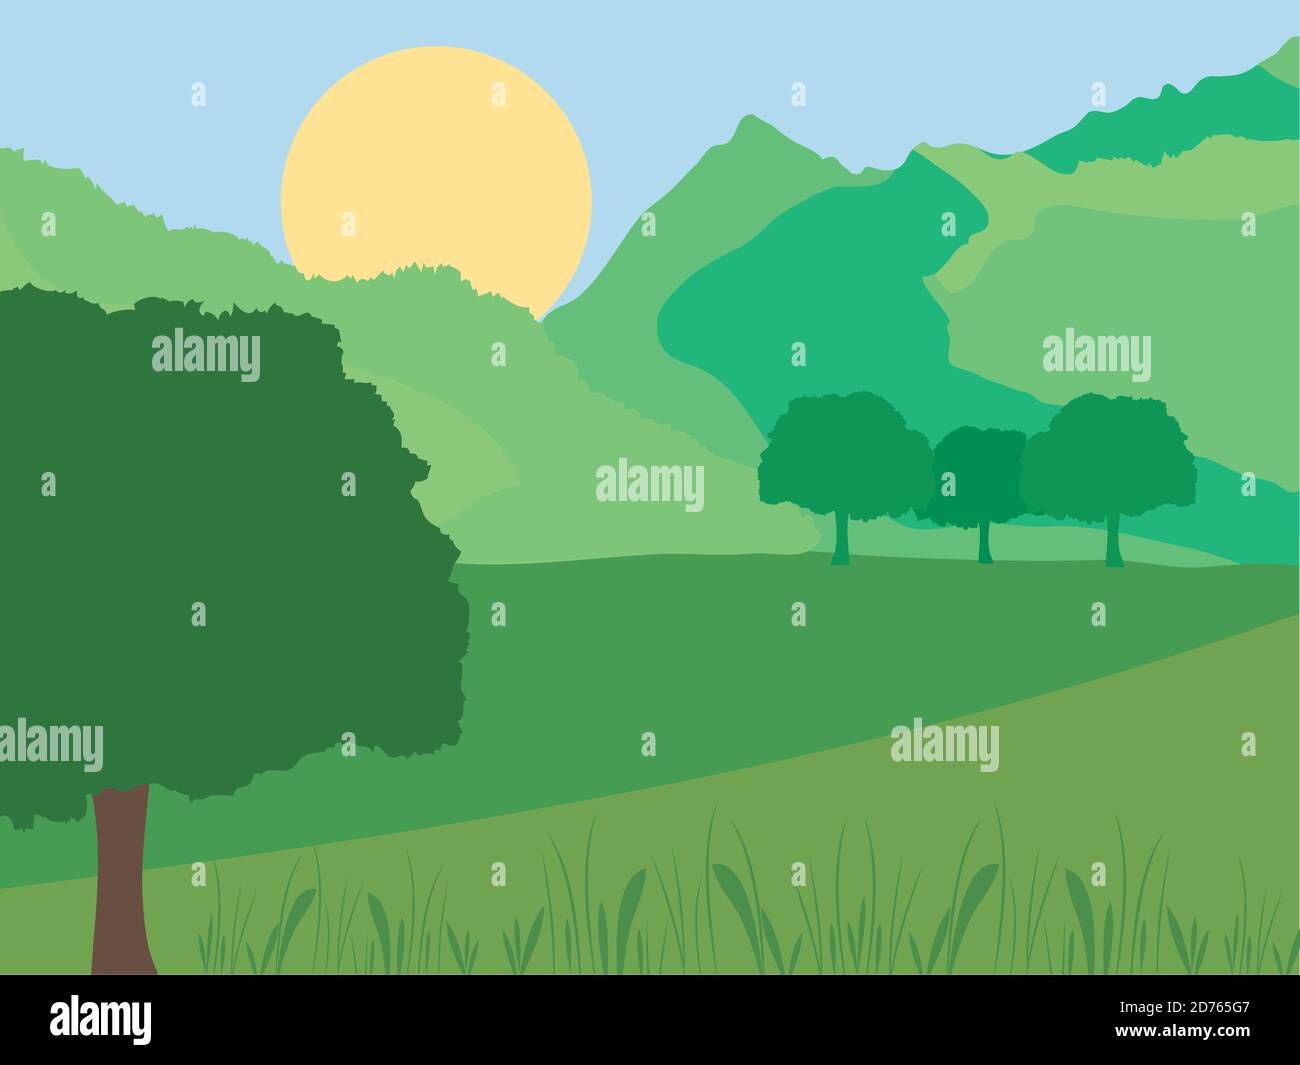 sunny valley landscape with trees, colorful design, vector illustration ...